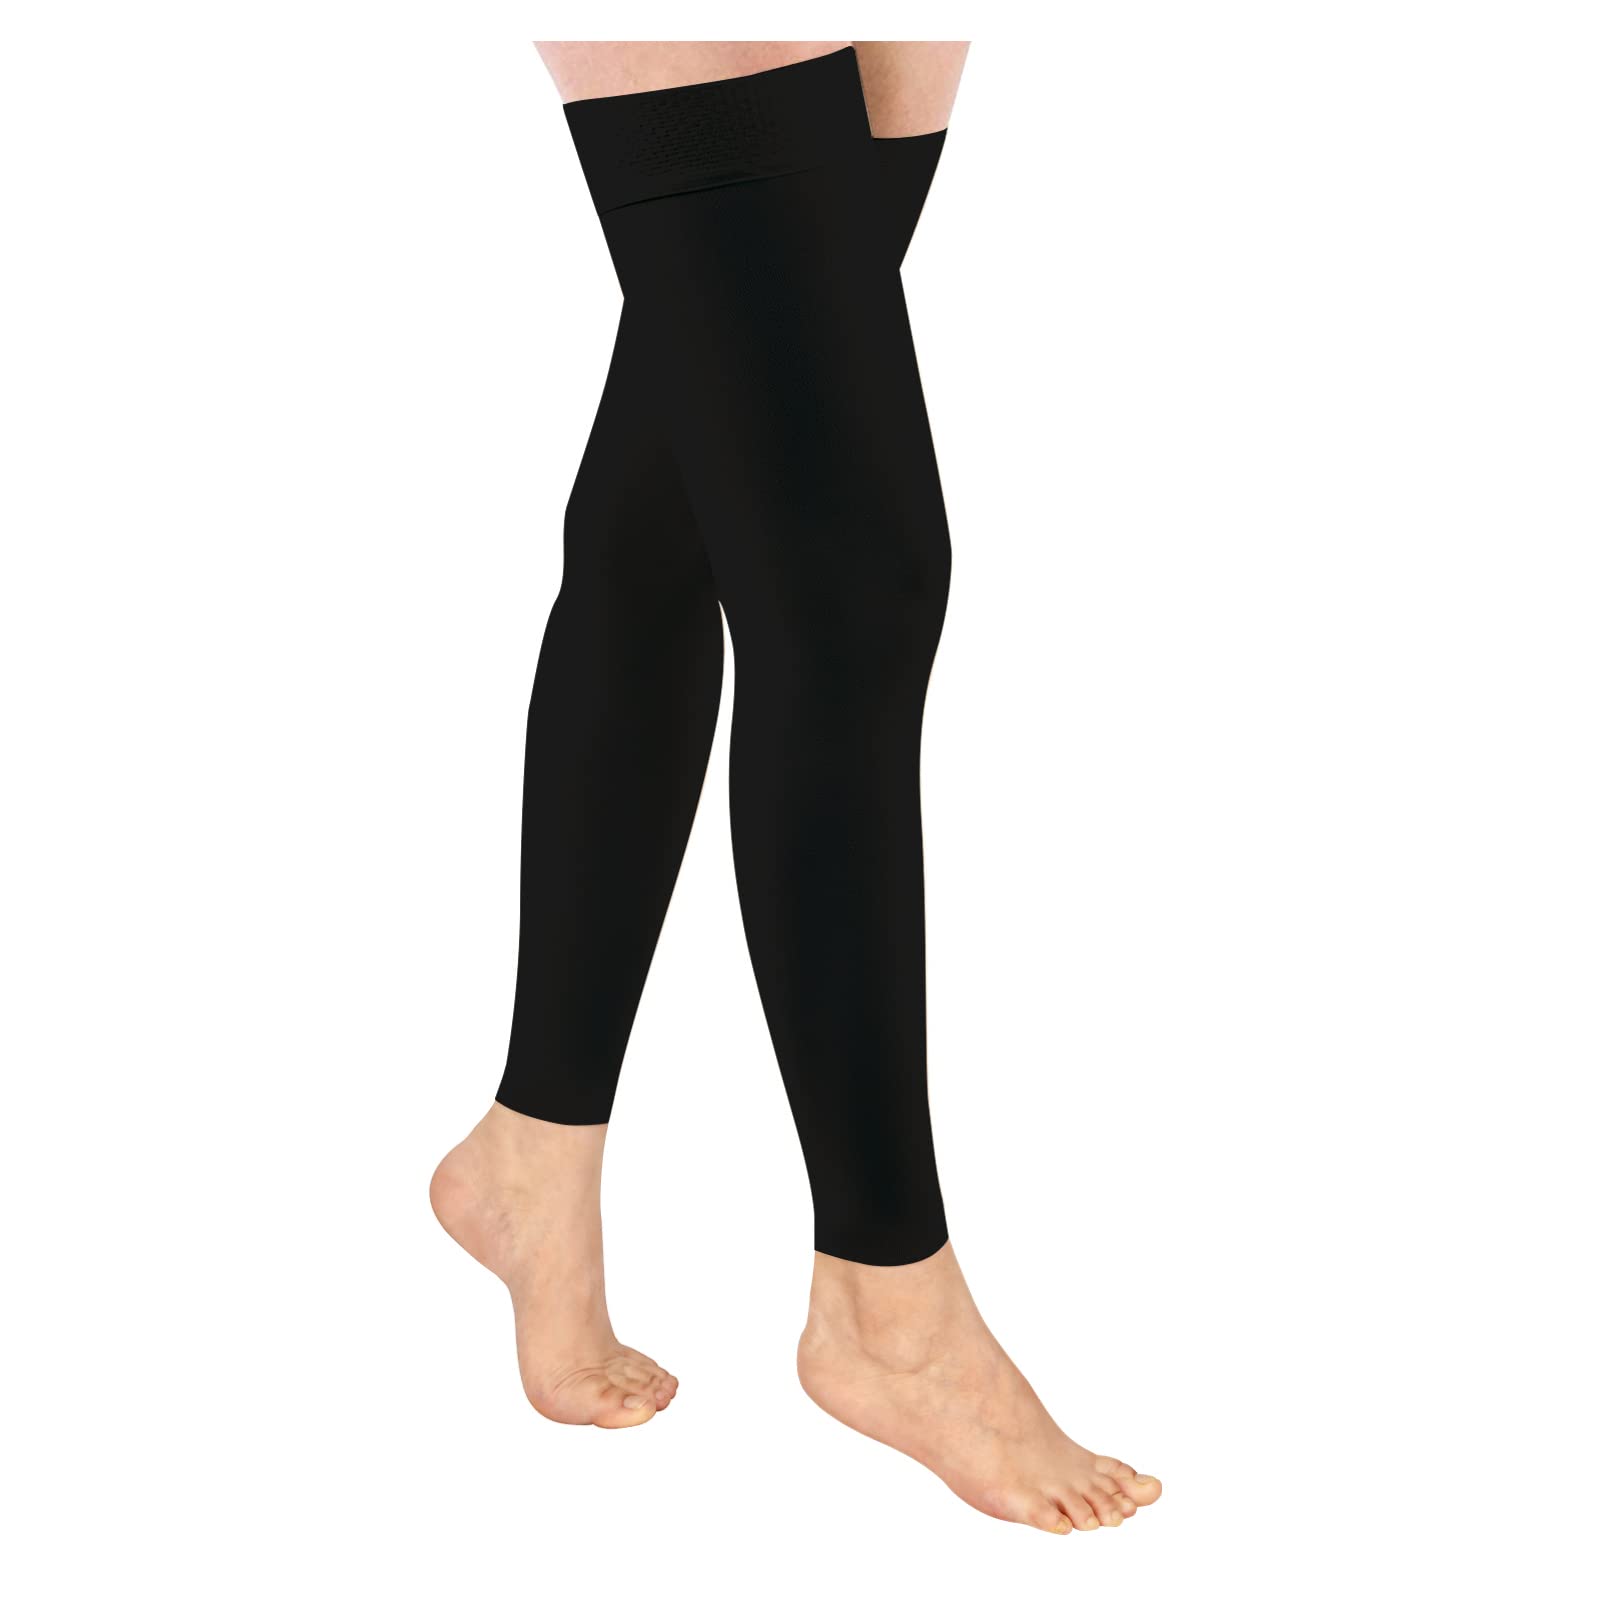 Ktinnead Thigh High Compression Stockings Footless 20-30mmHg for